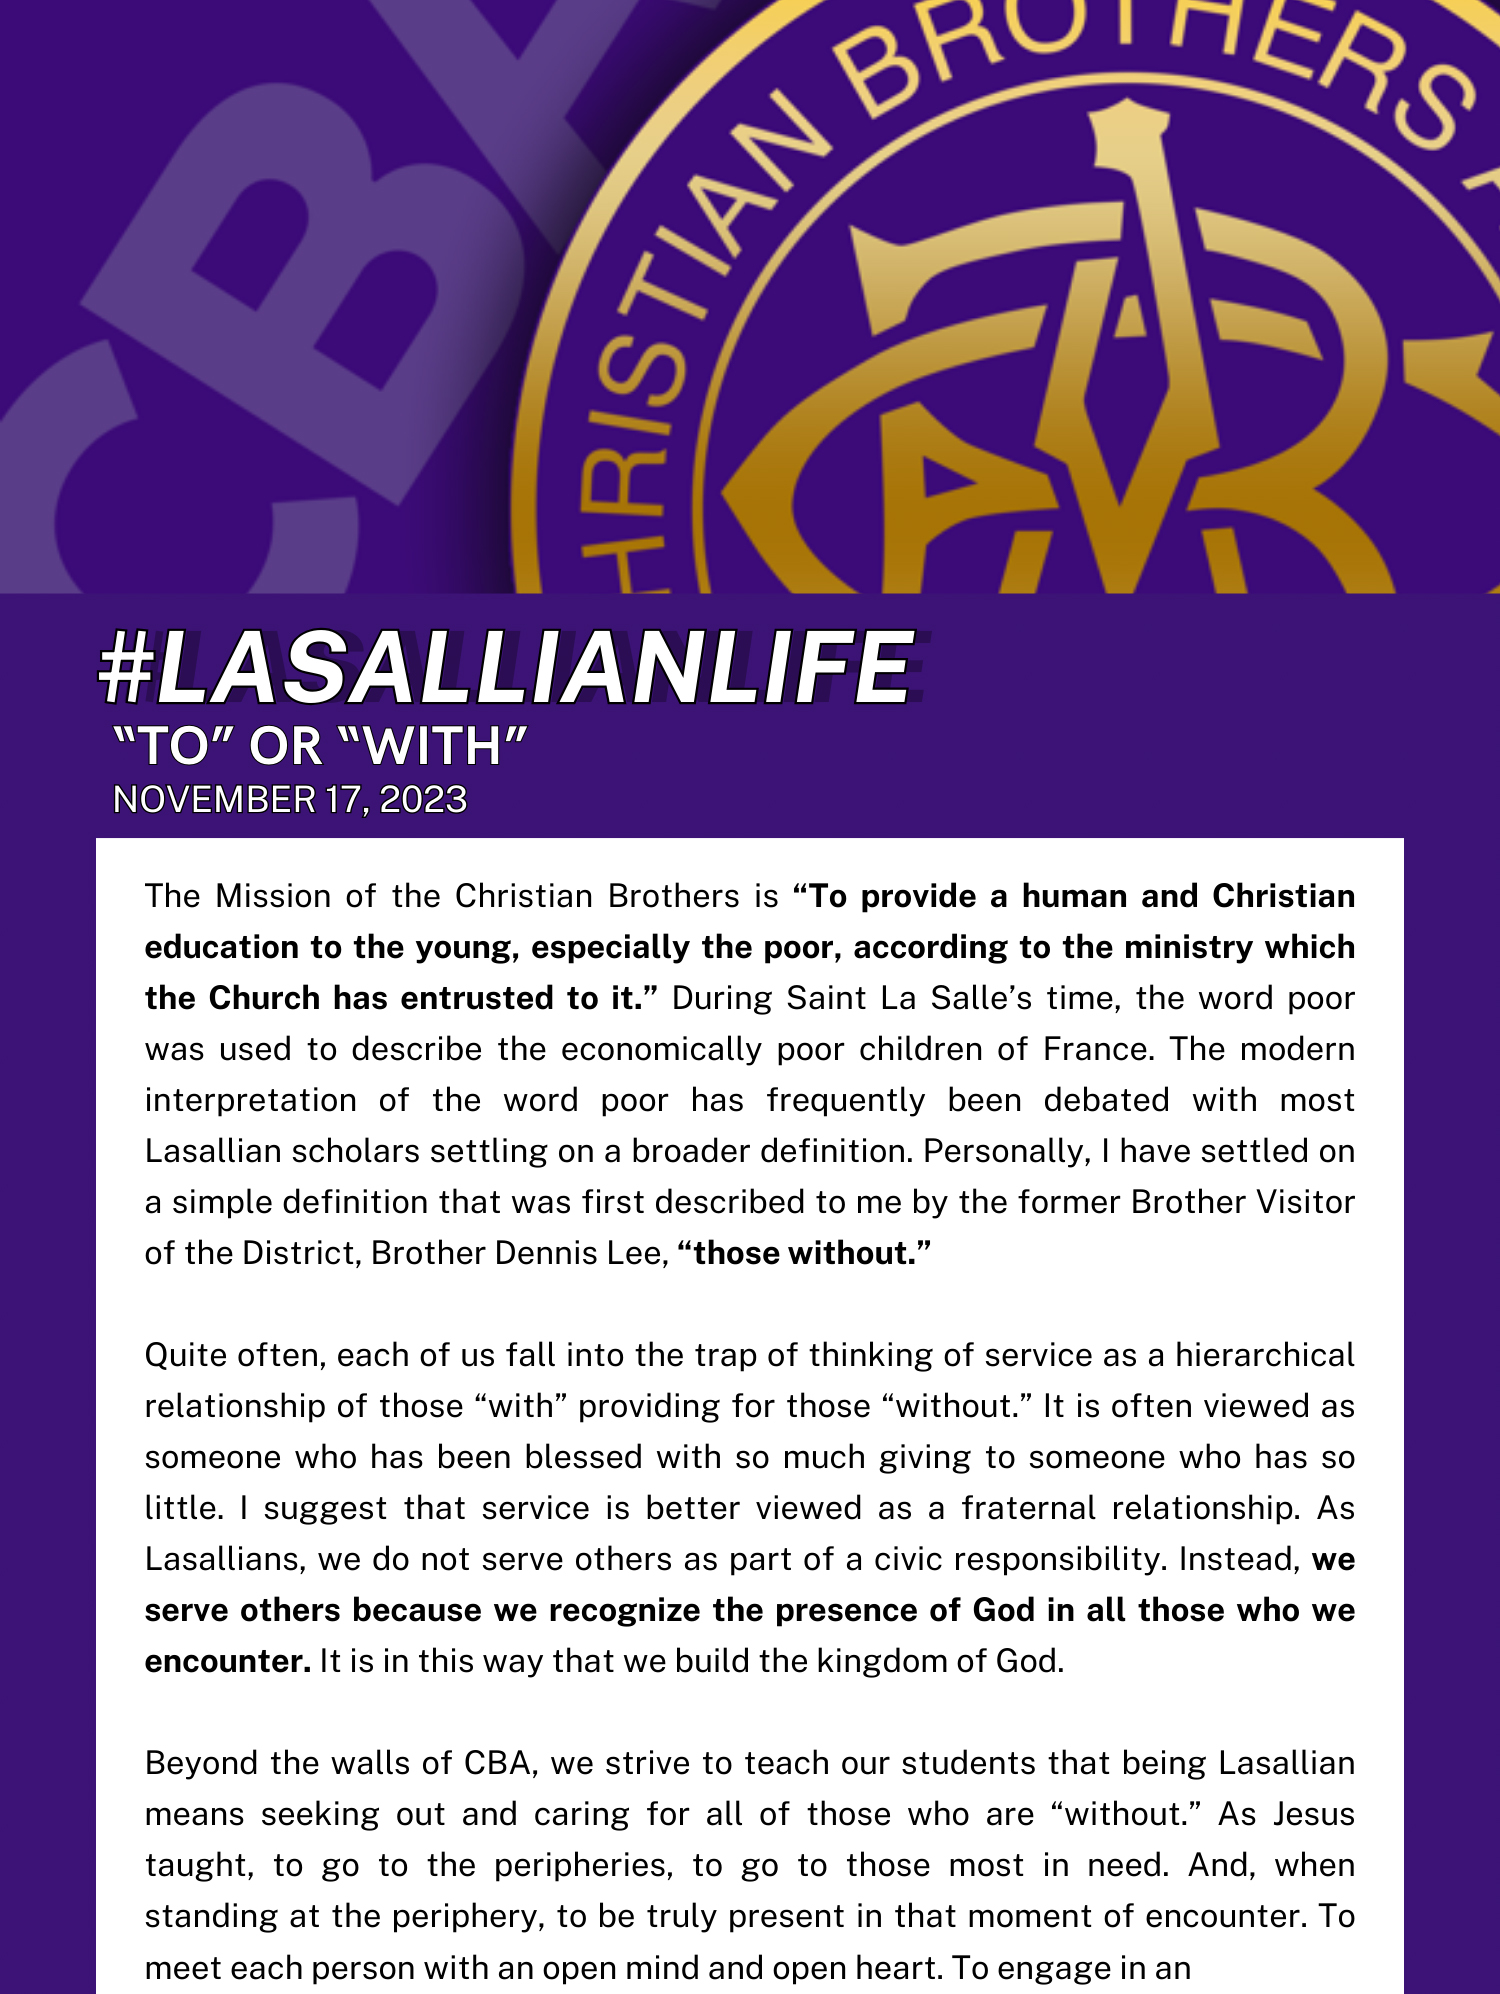 #LasallianLife : “To” or “With”